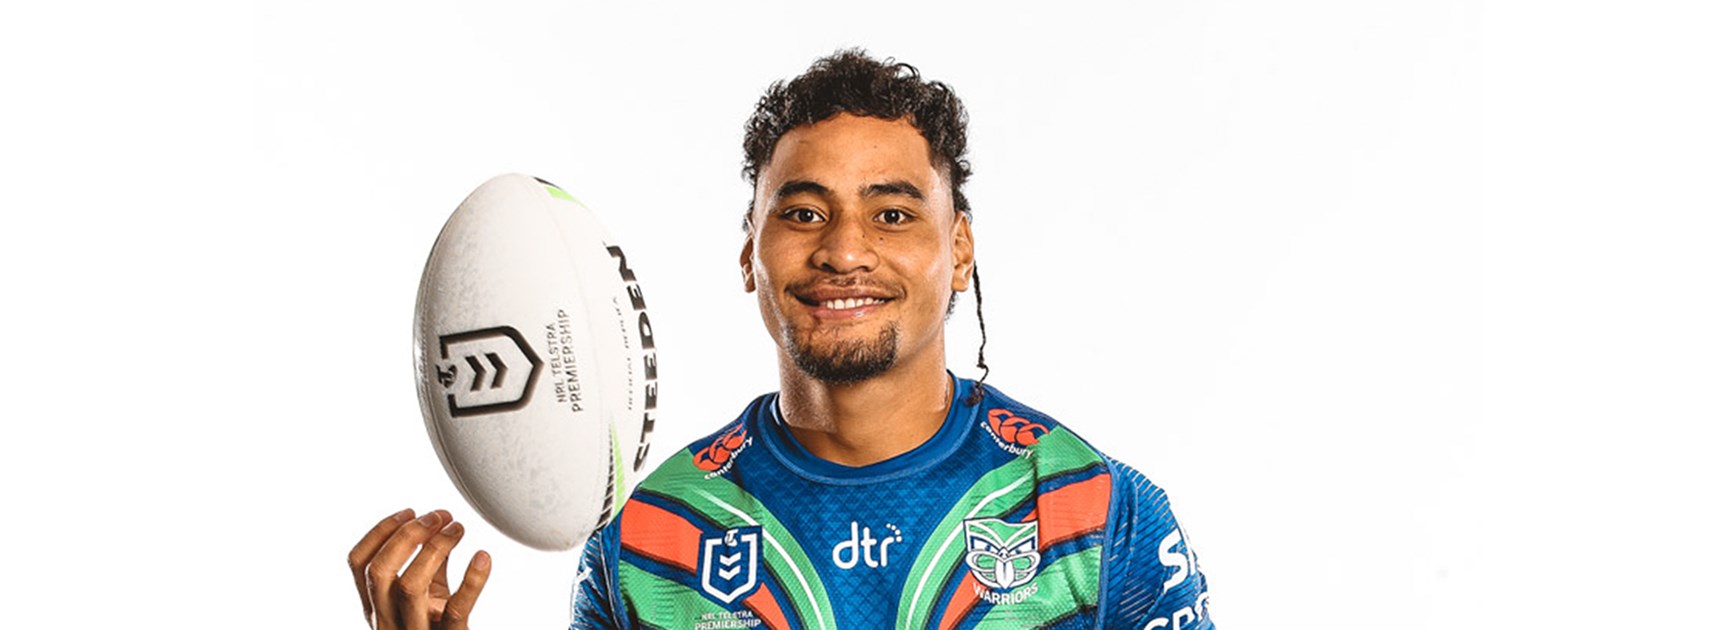 Katoa and Egan all set for first-round clash against Titans